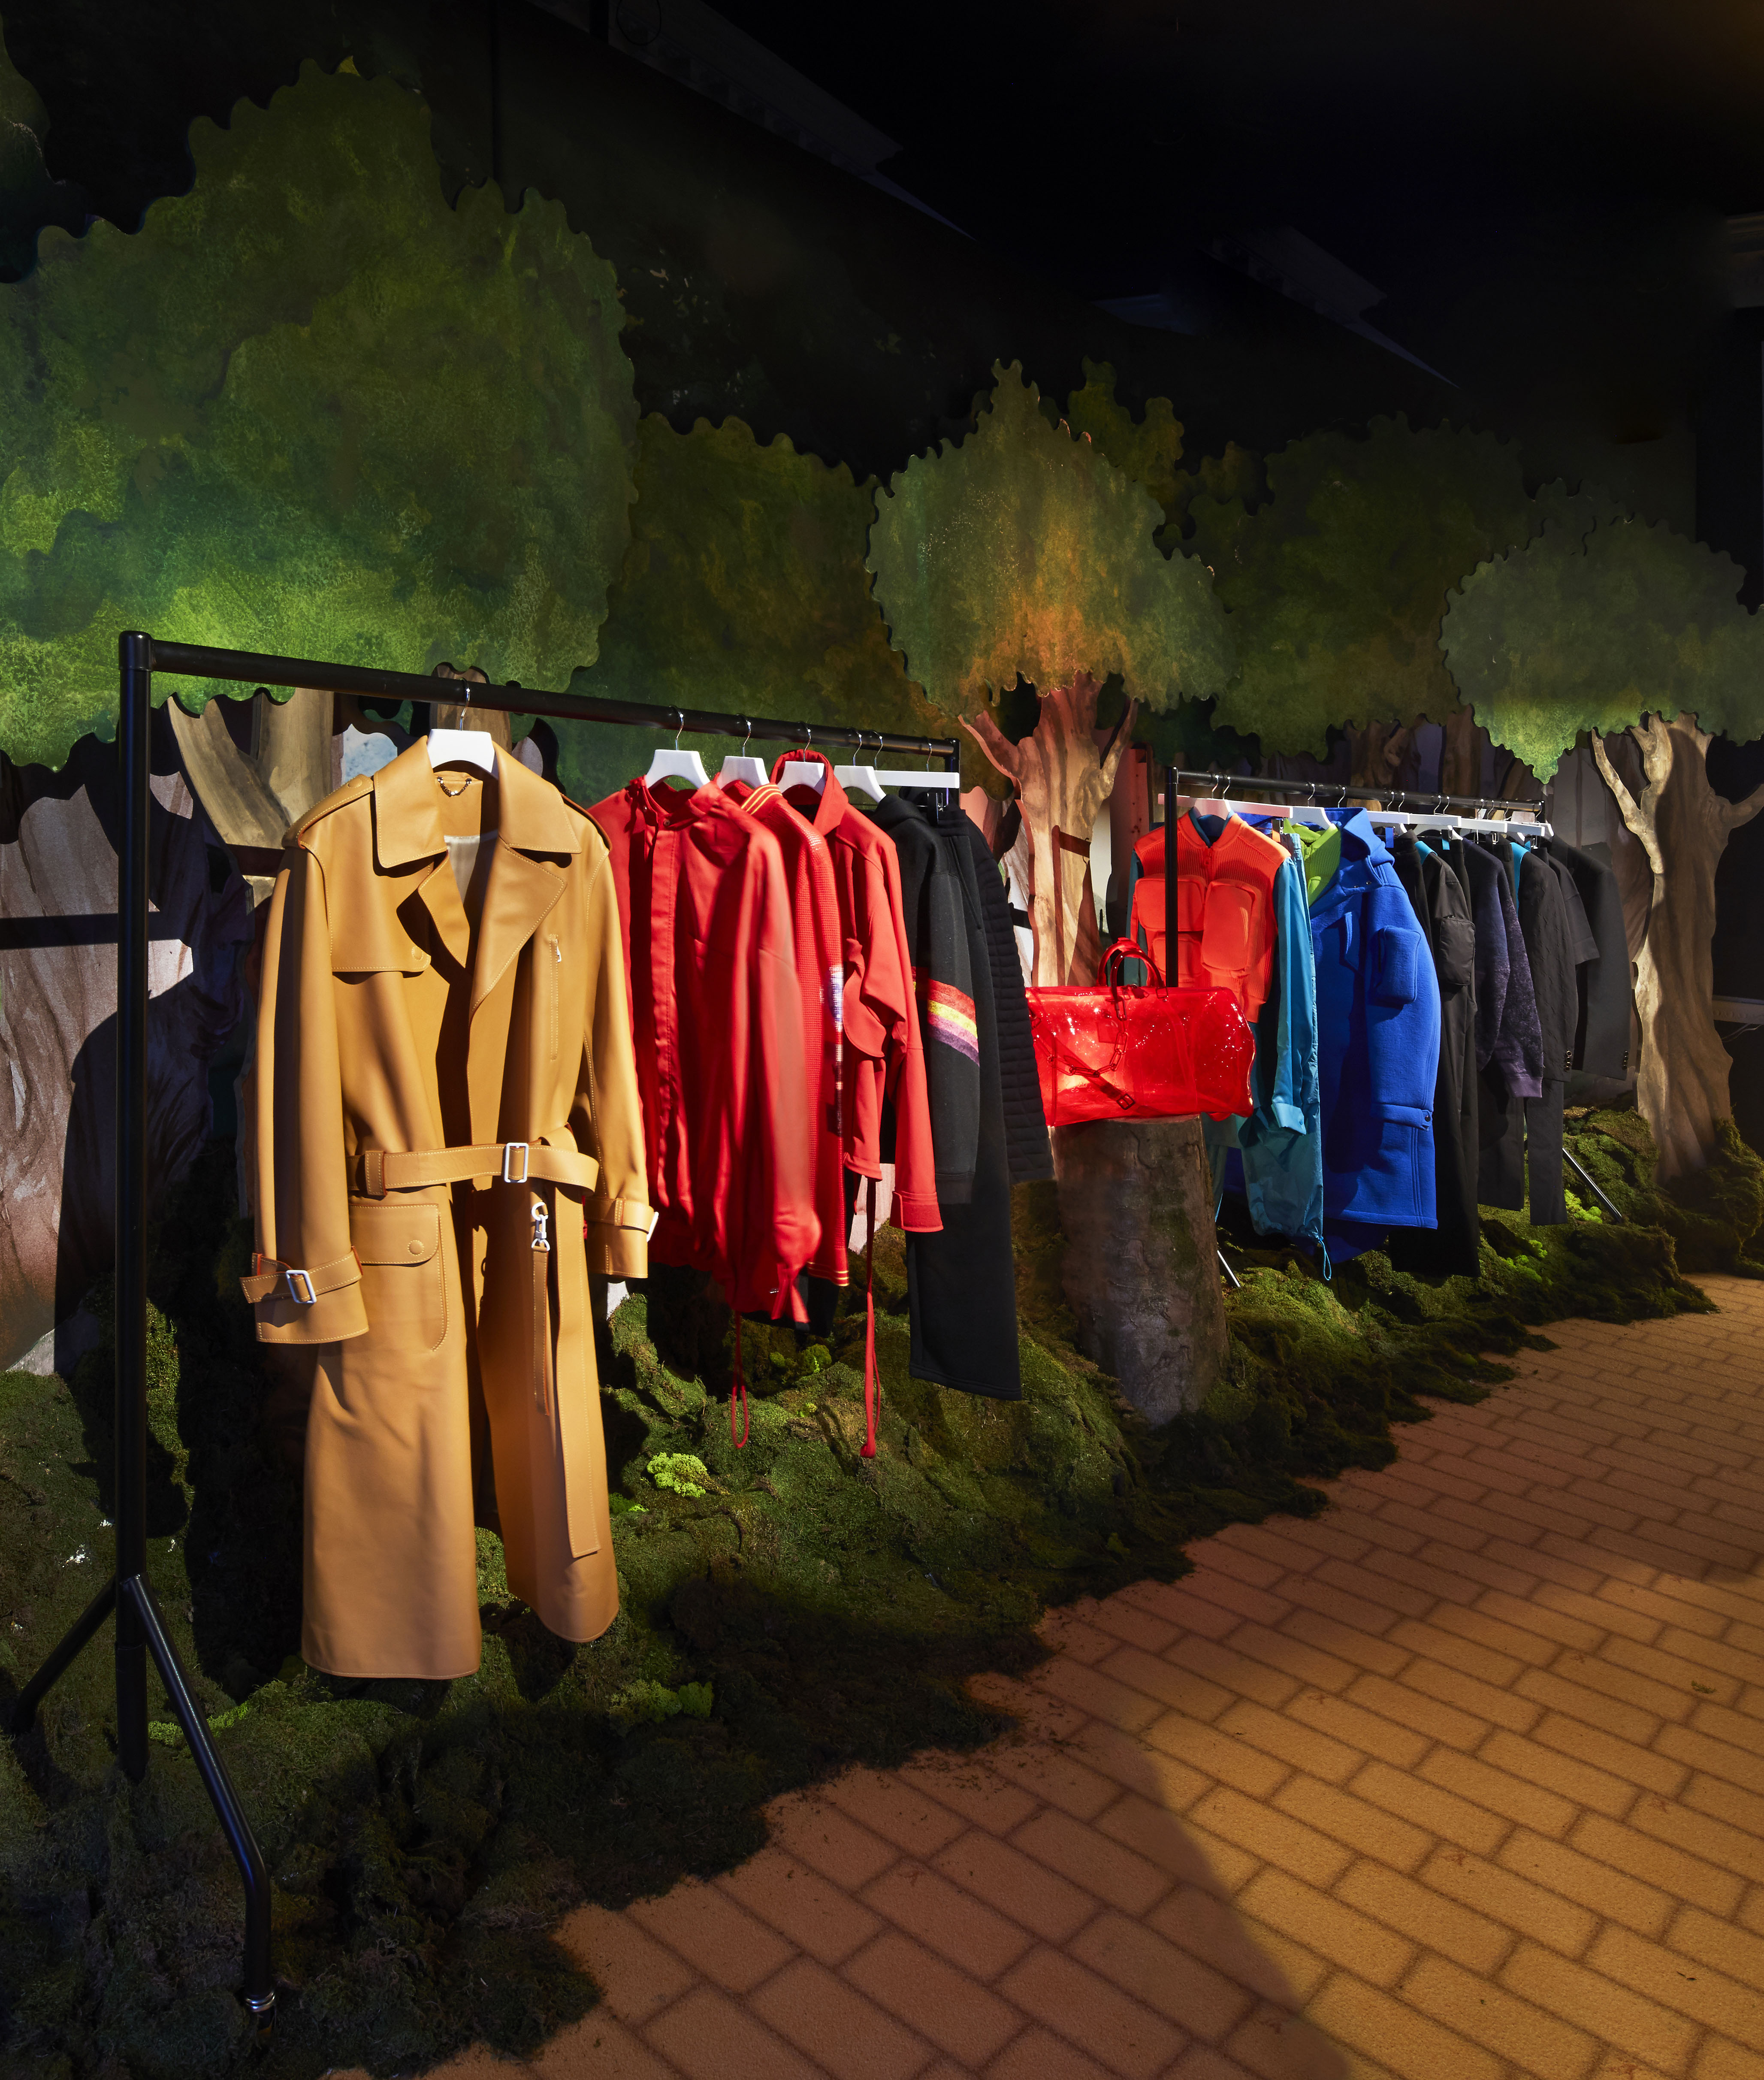 Louis Vuitton Virgil Abloh debuts collection at Wizard of Oz London pop-up